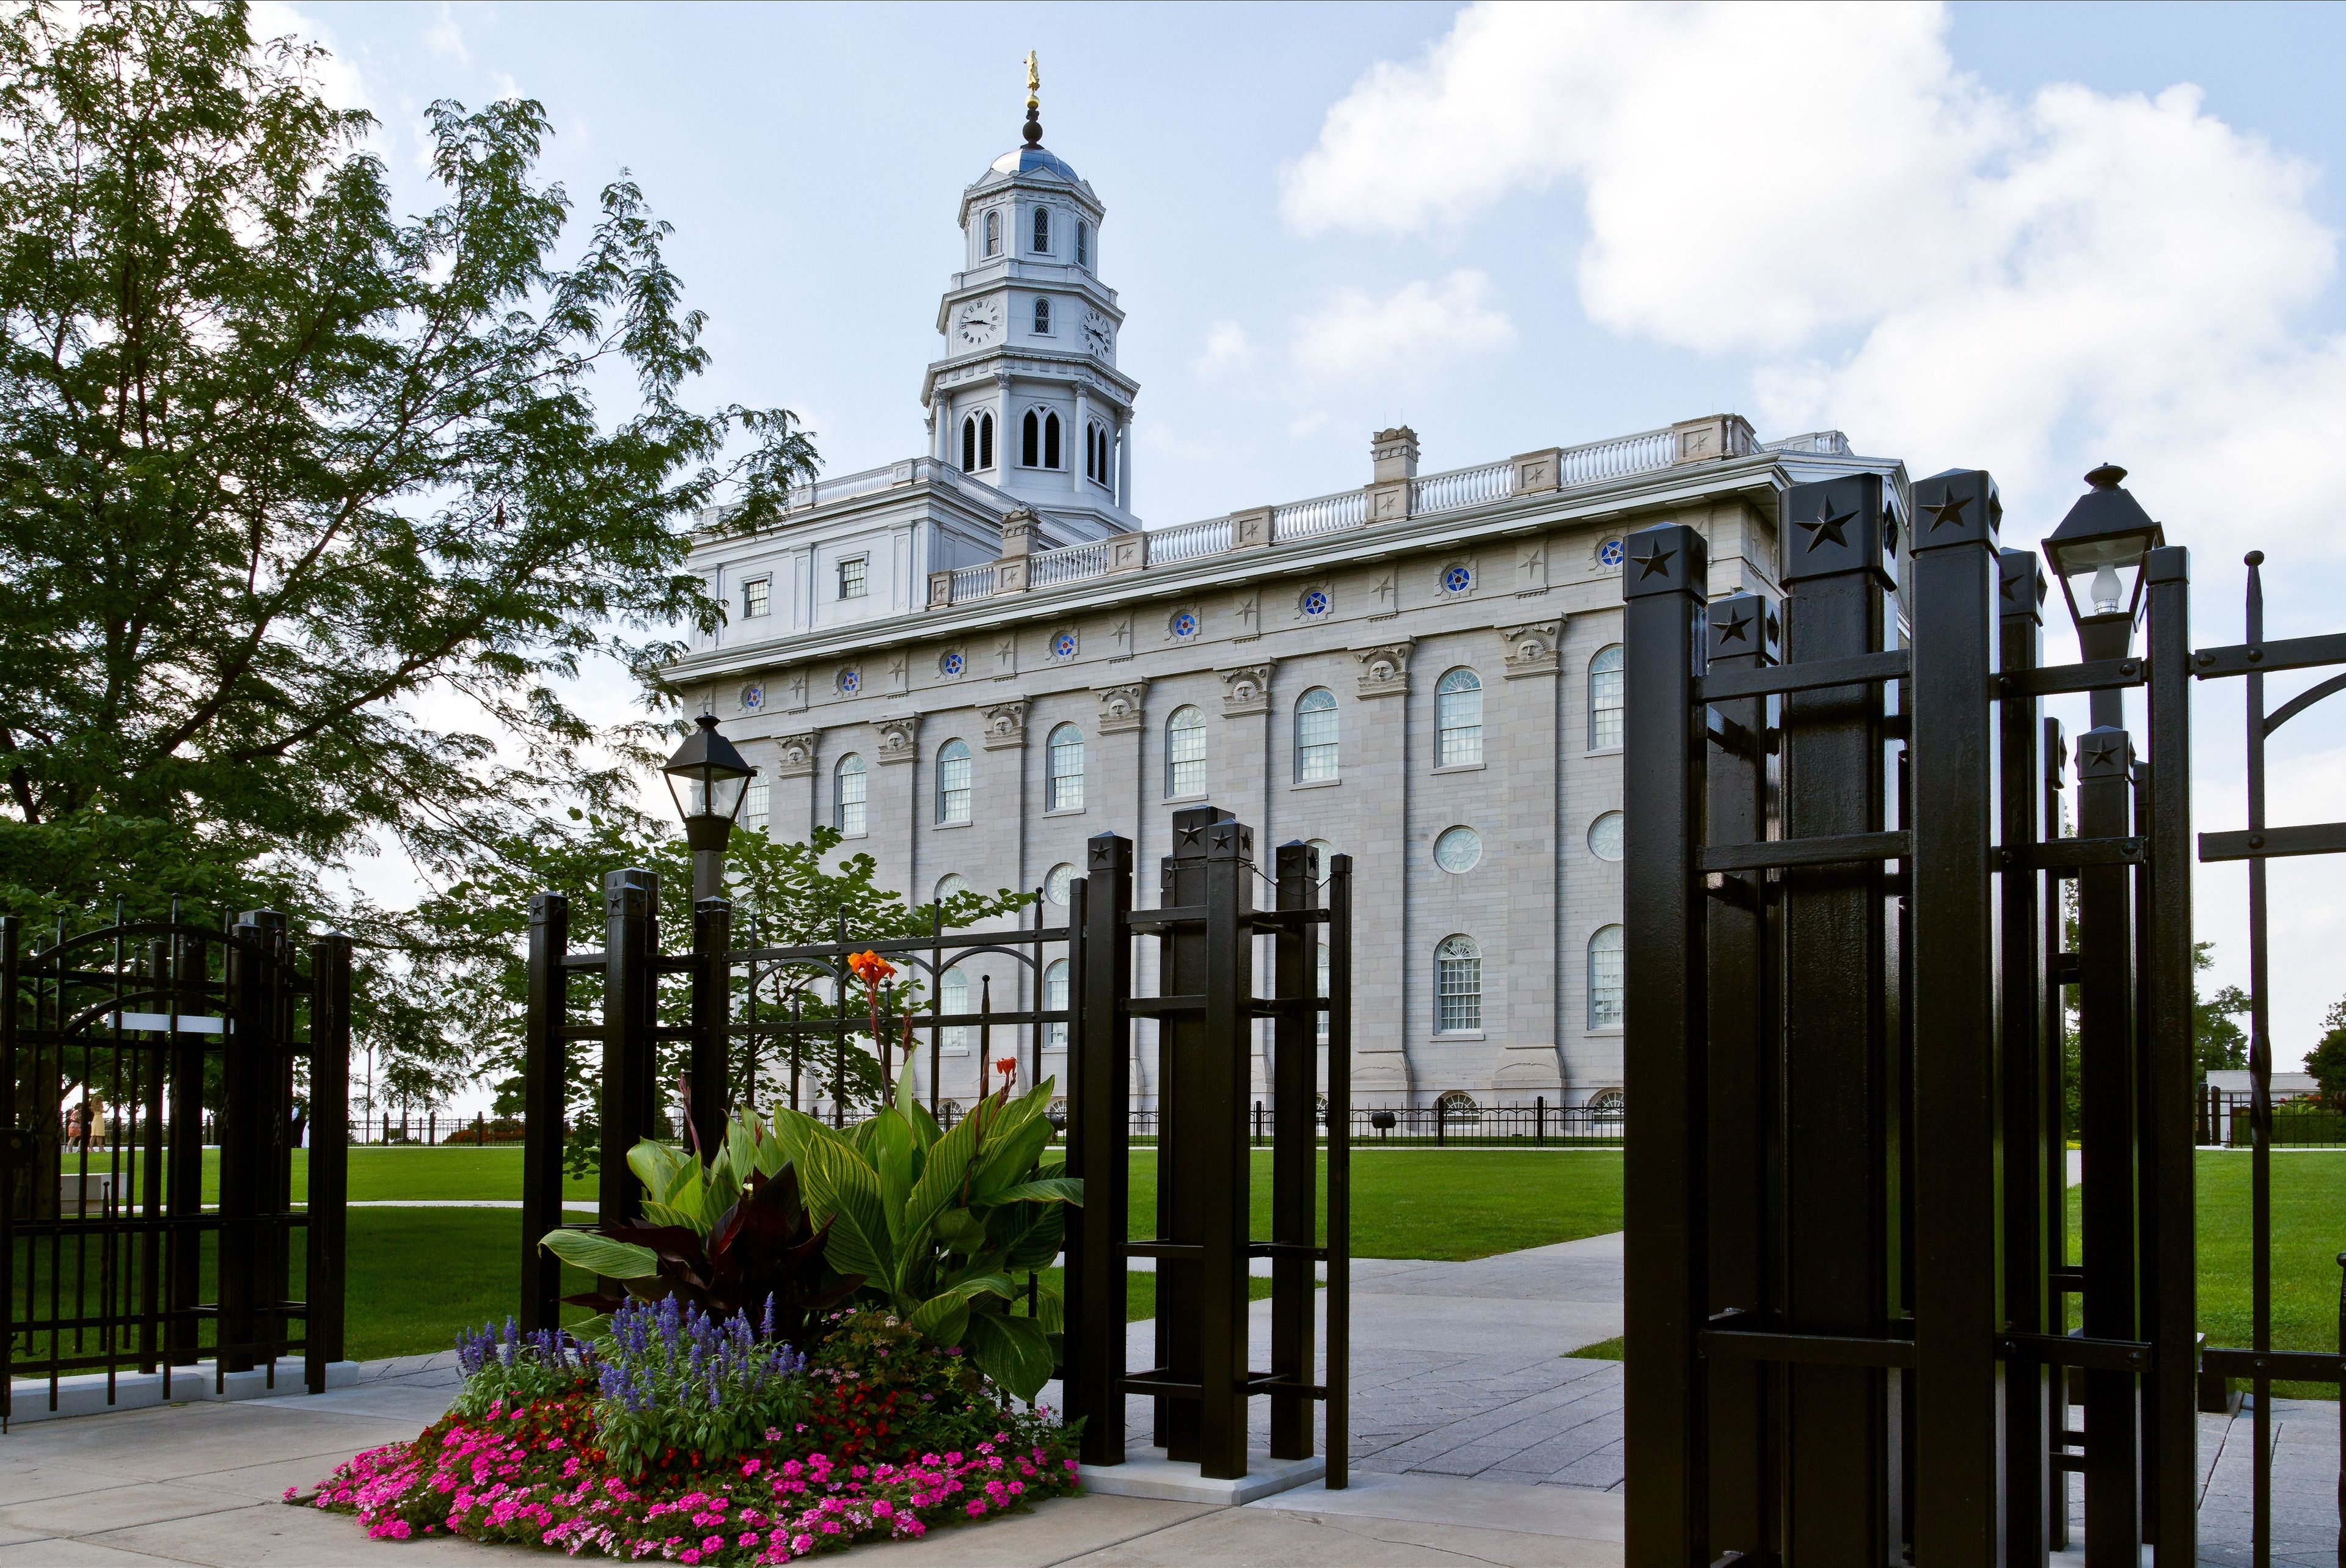 The Nauvoo Illinois Temple gates, including scenery and the exterior of the temple.